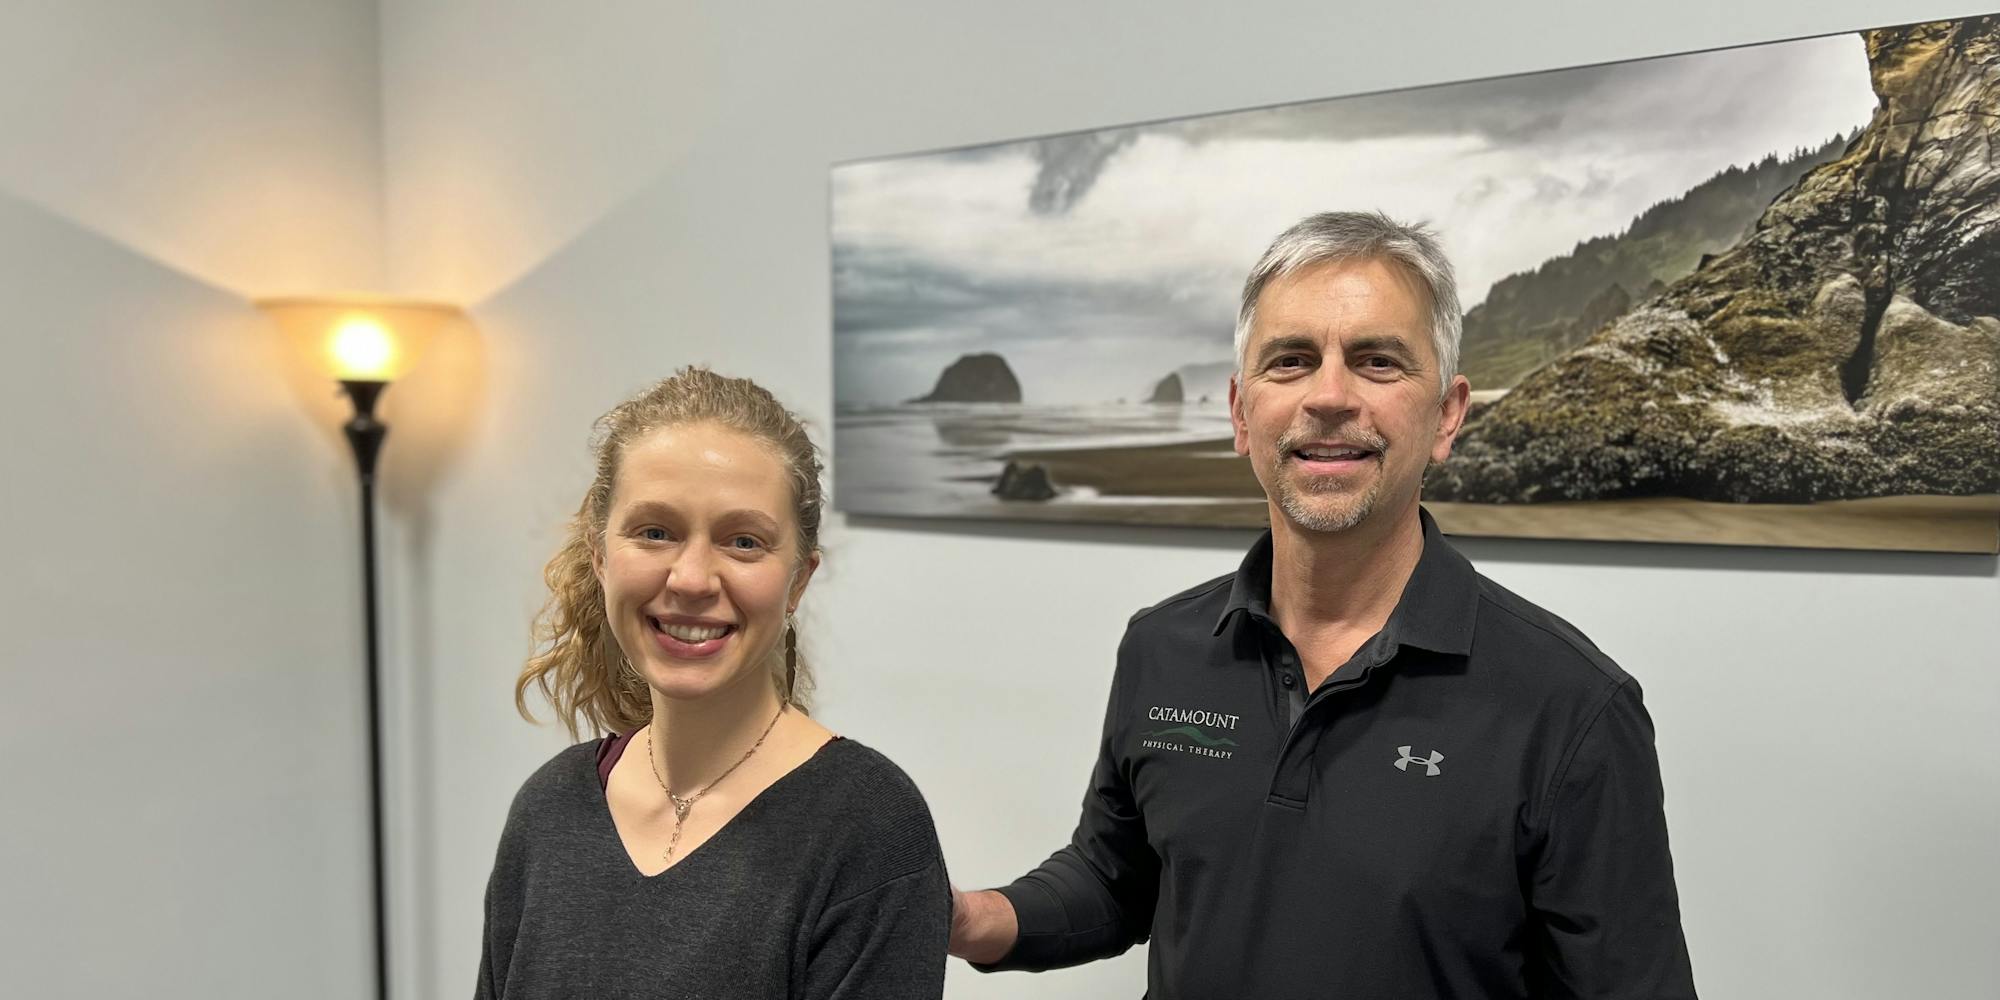 Physical Therapy South Burlington VT